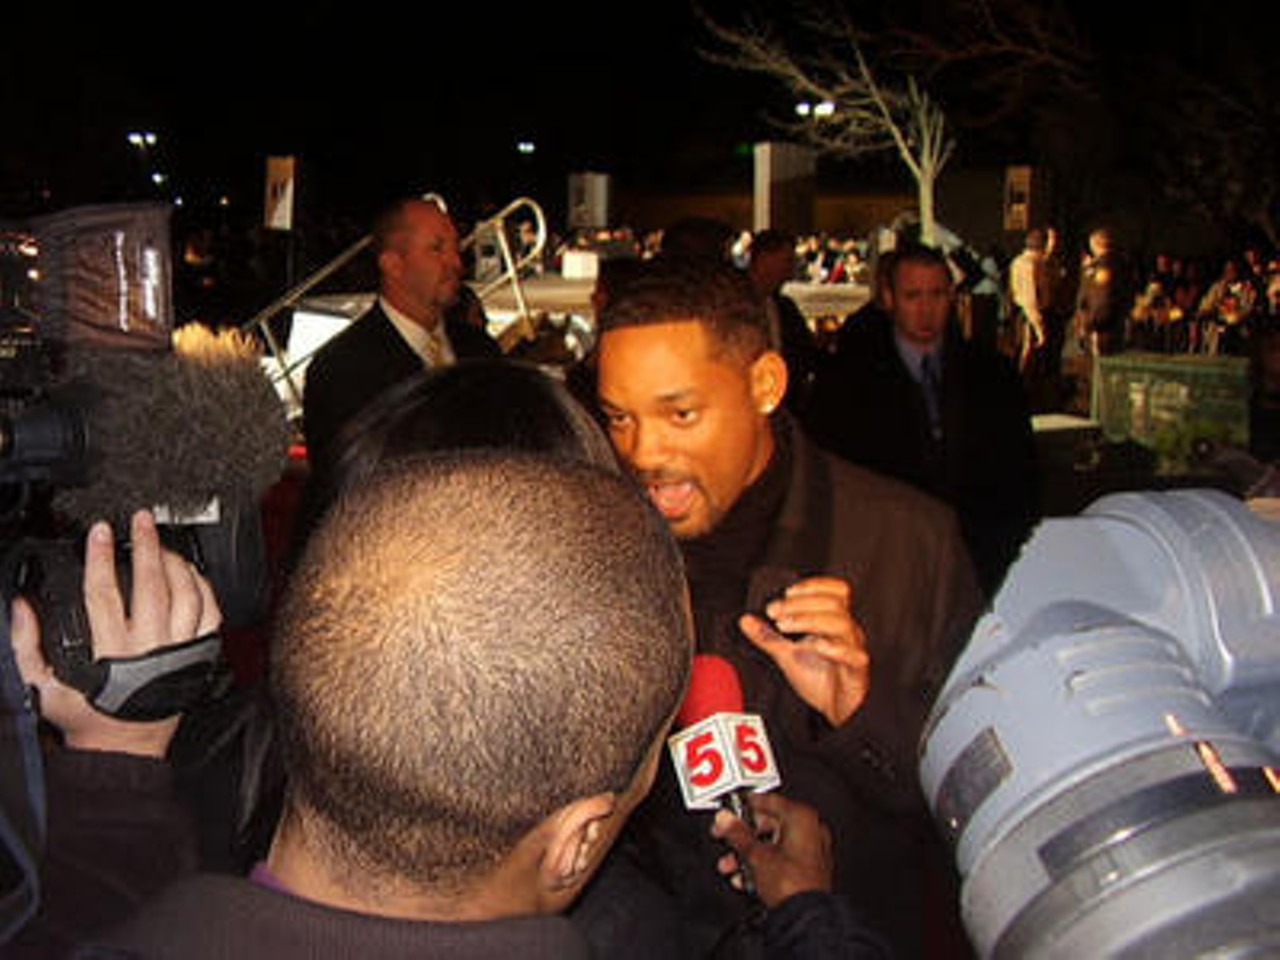 It's clearly a big deal when the Fresh Prince comes to town. Will Smith was in St. Louis for a premiere Seven Pounds. See more photos.